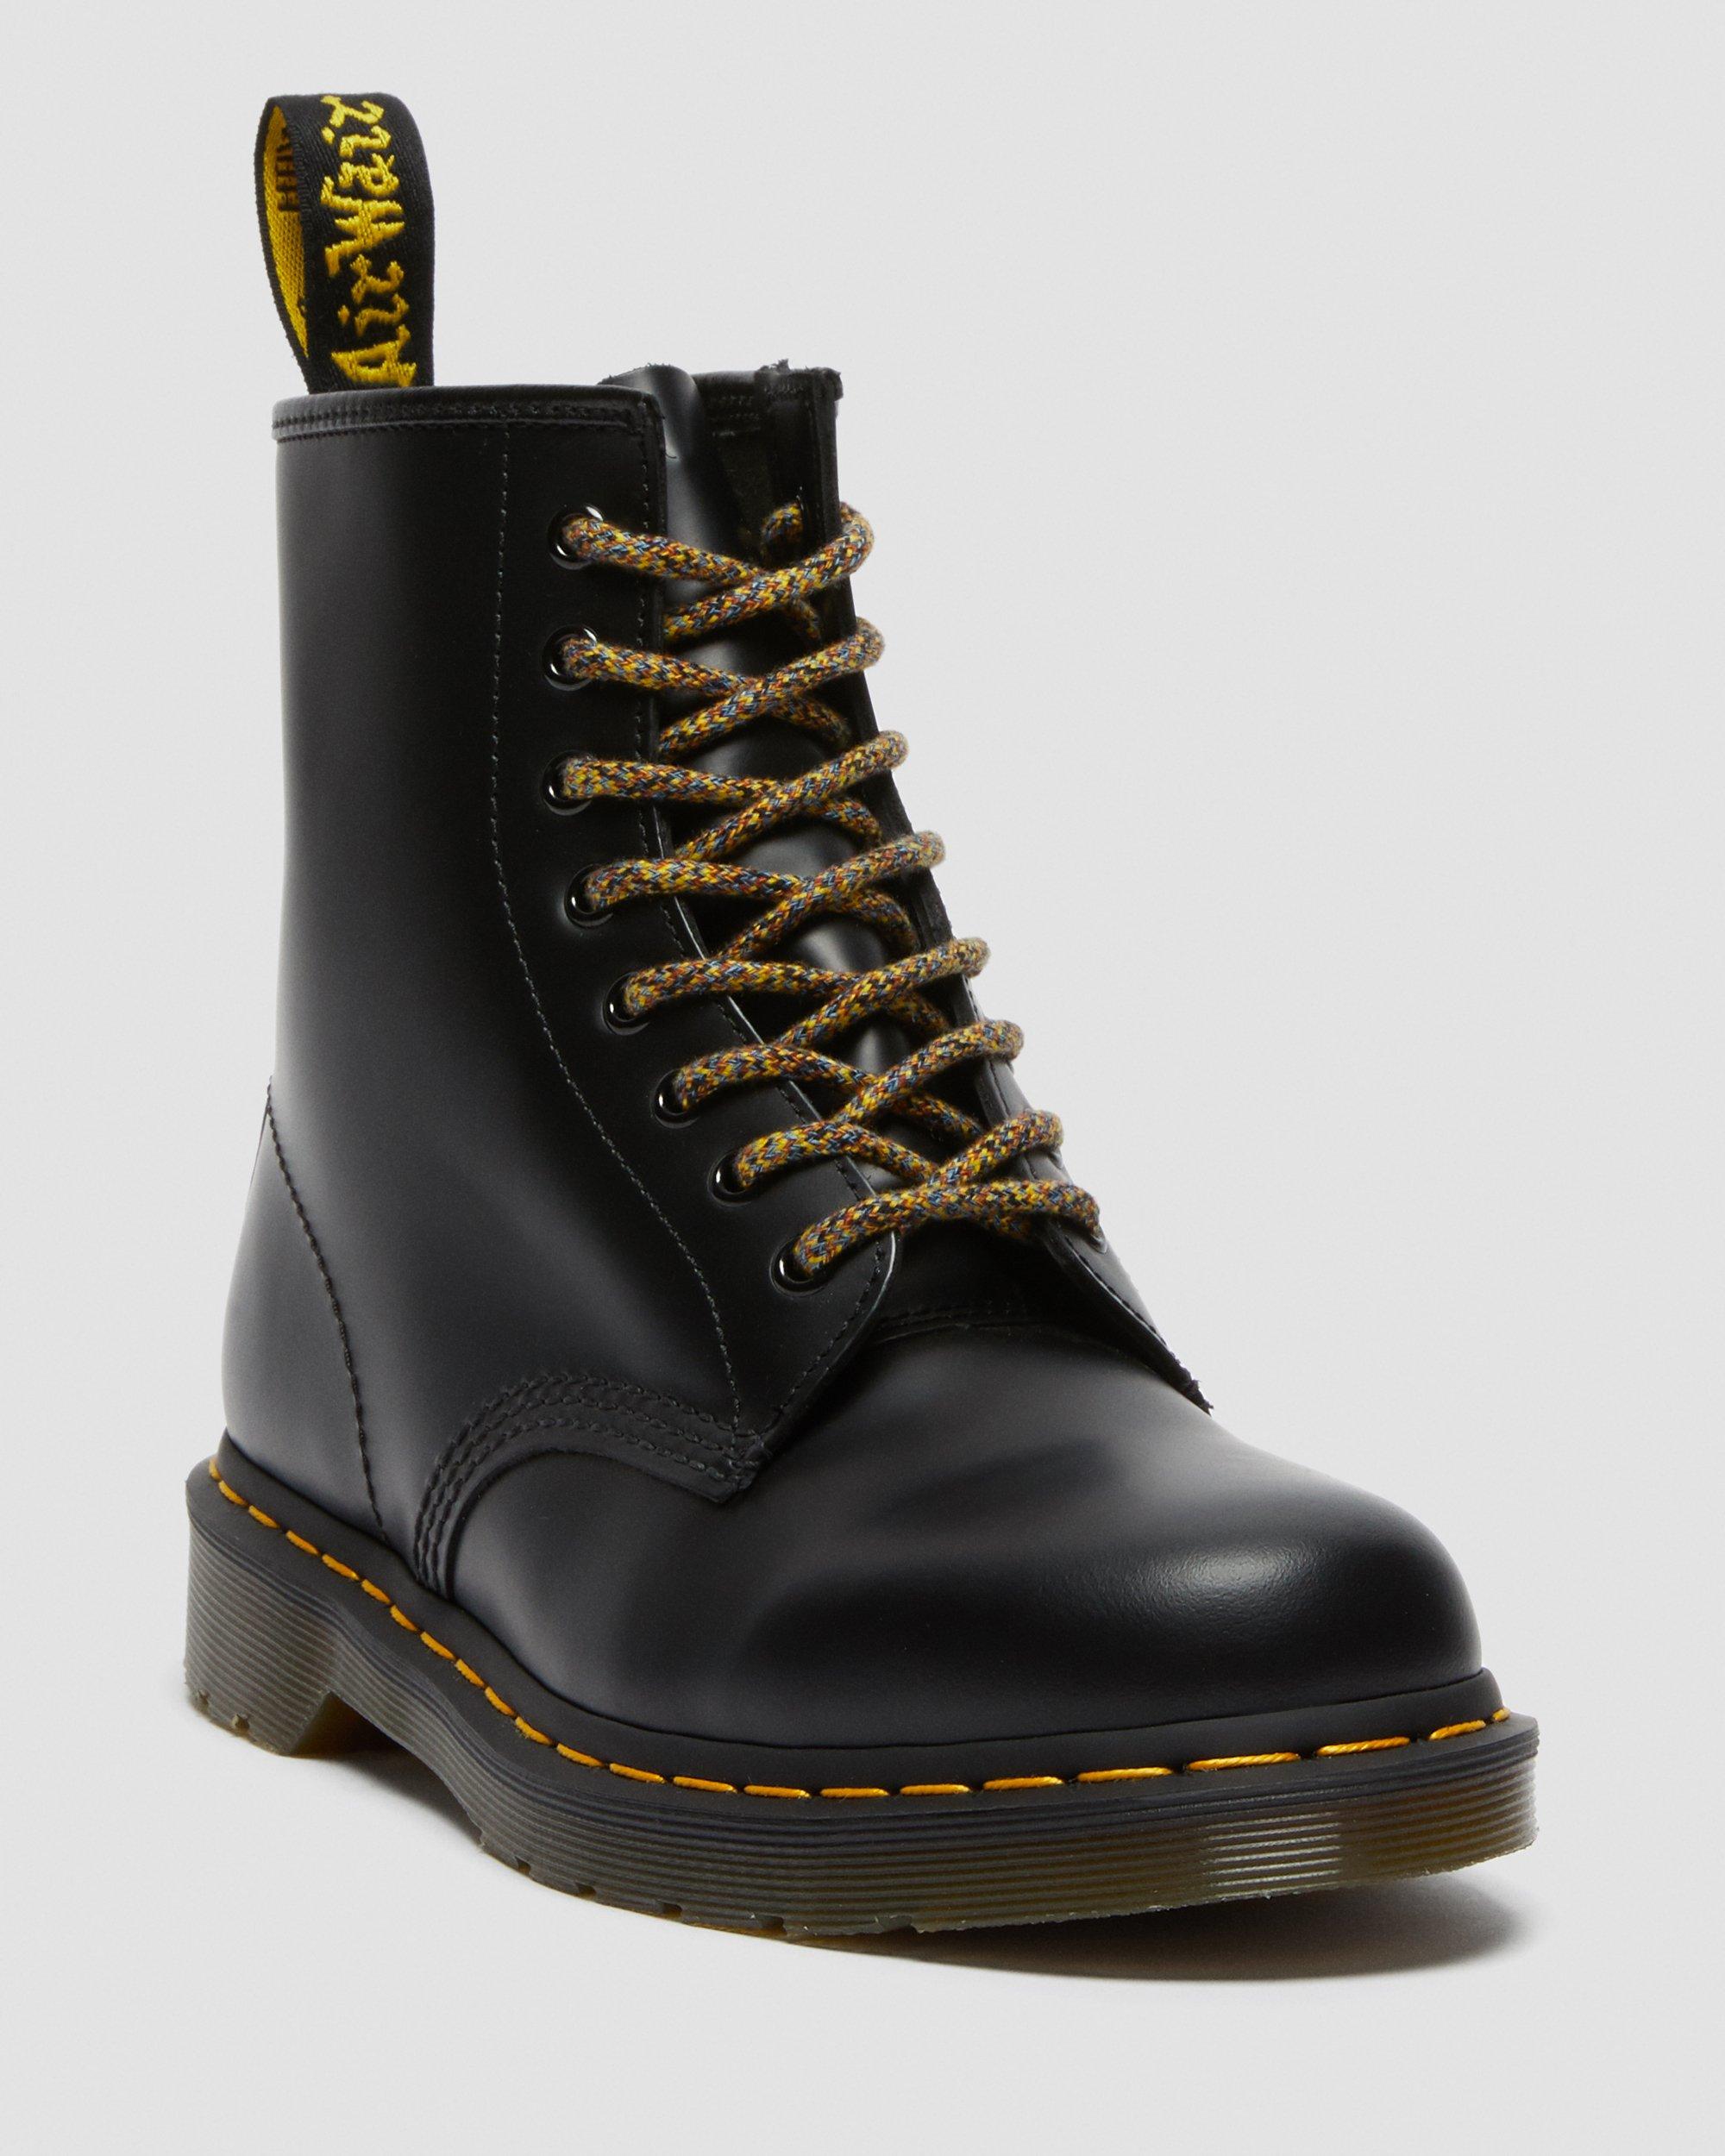 55 Inch Round Marl Shoe Laces (8-10 Eye) in Yellow | Dr. Martens